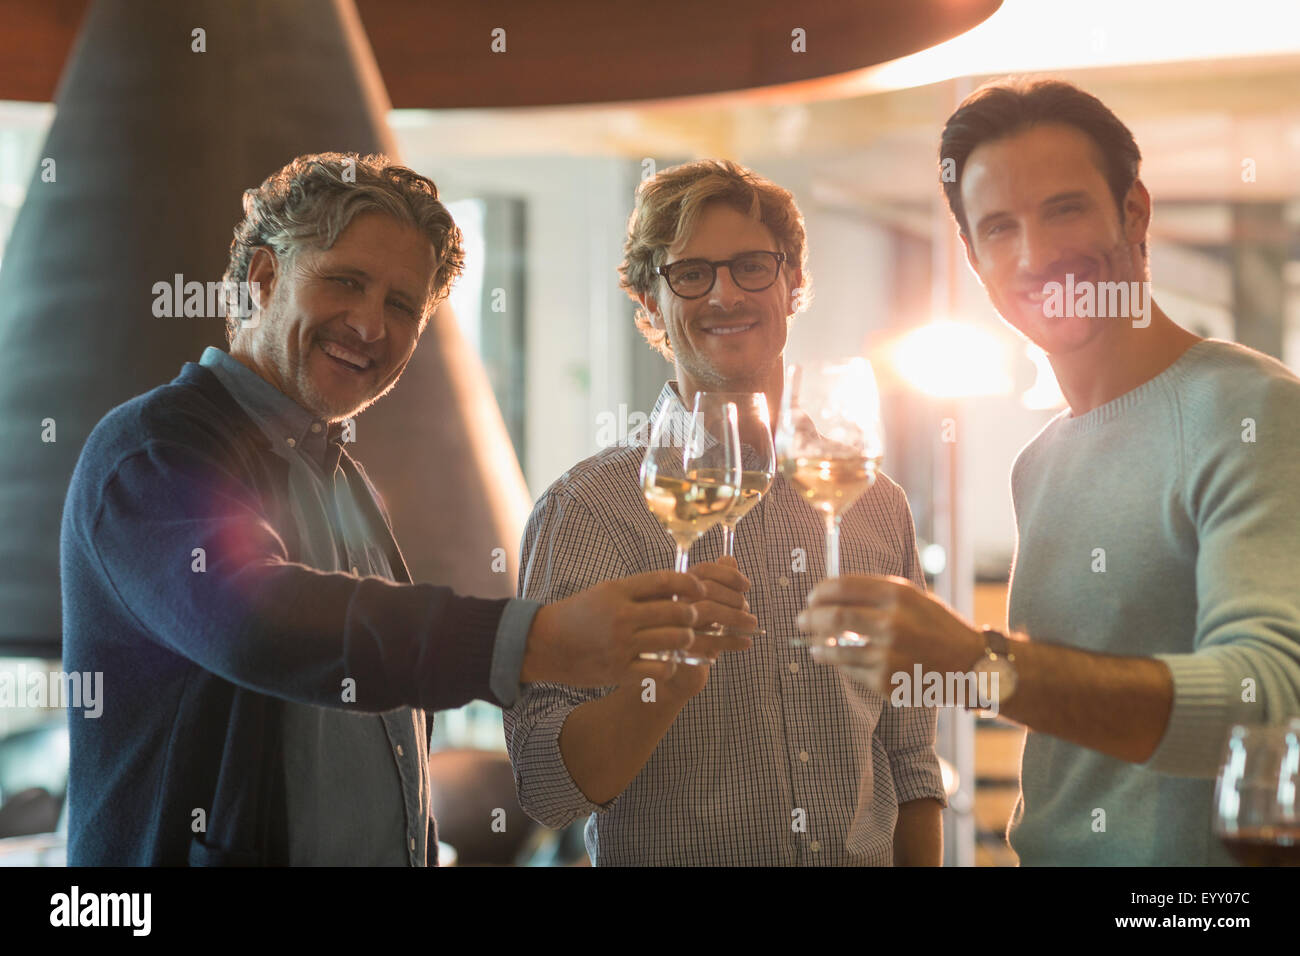 Portrait smiling men drinking white wine at winery Stock Photo